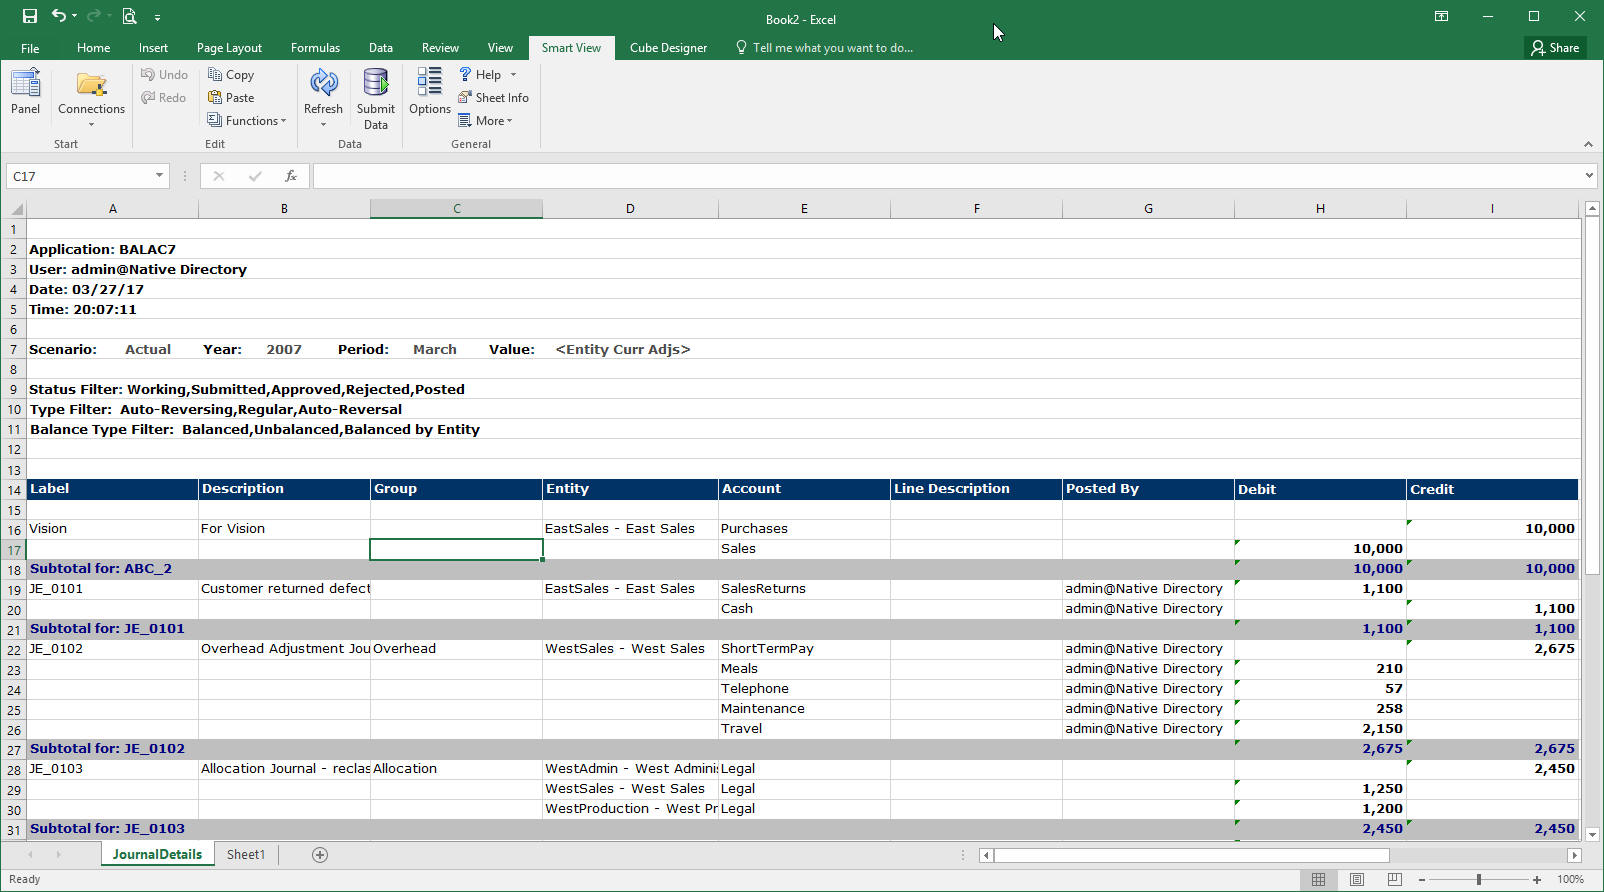 An image of a journal report in Excel.